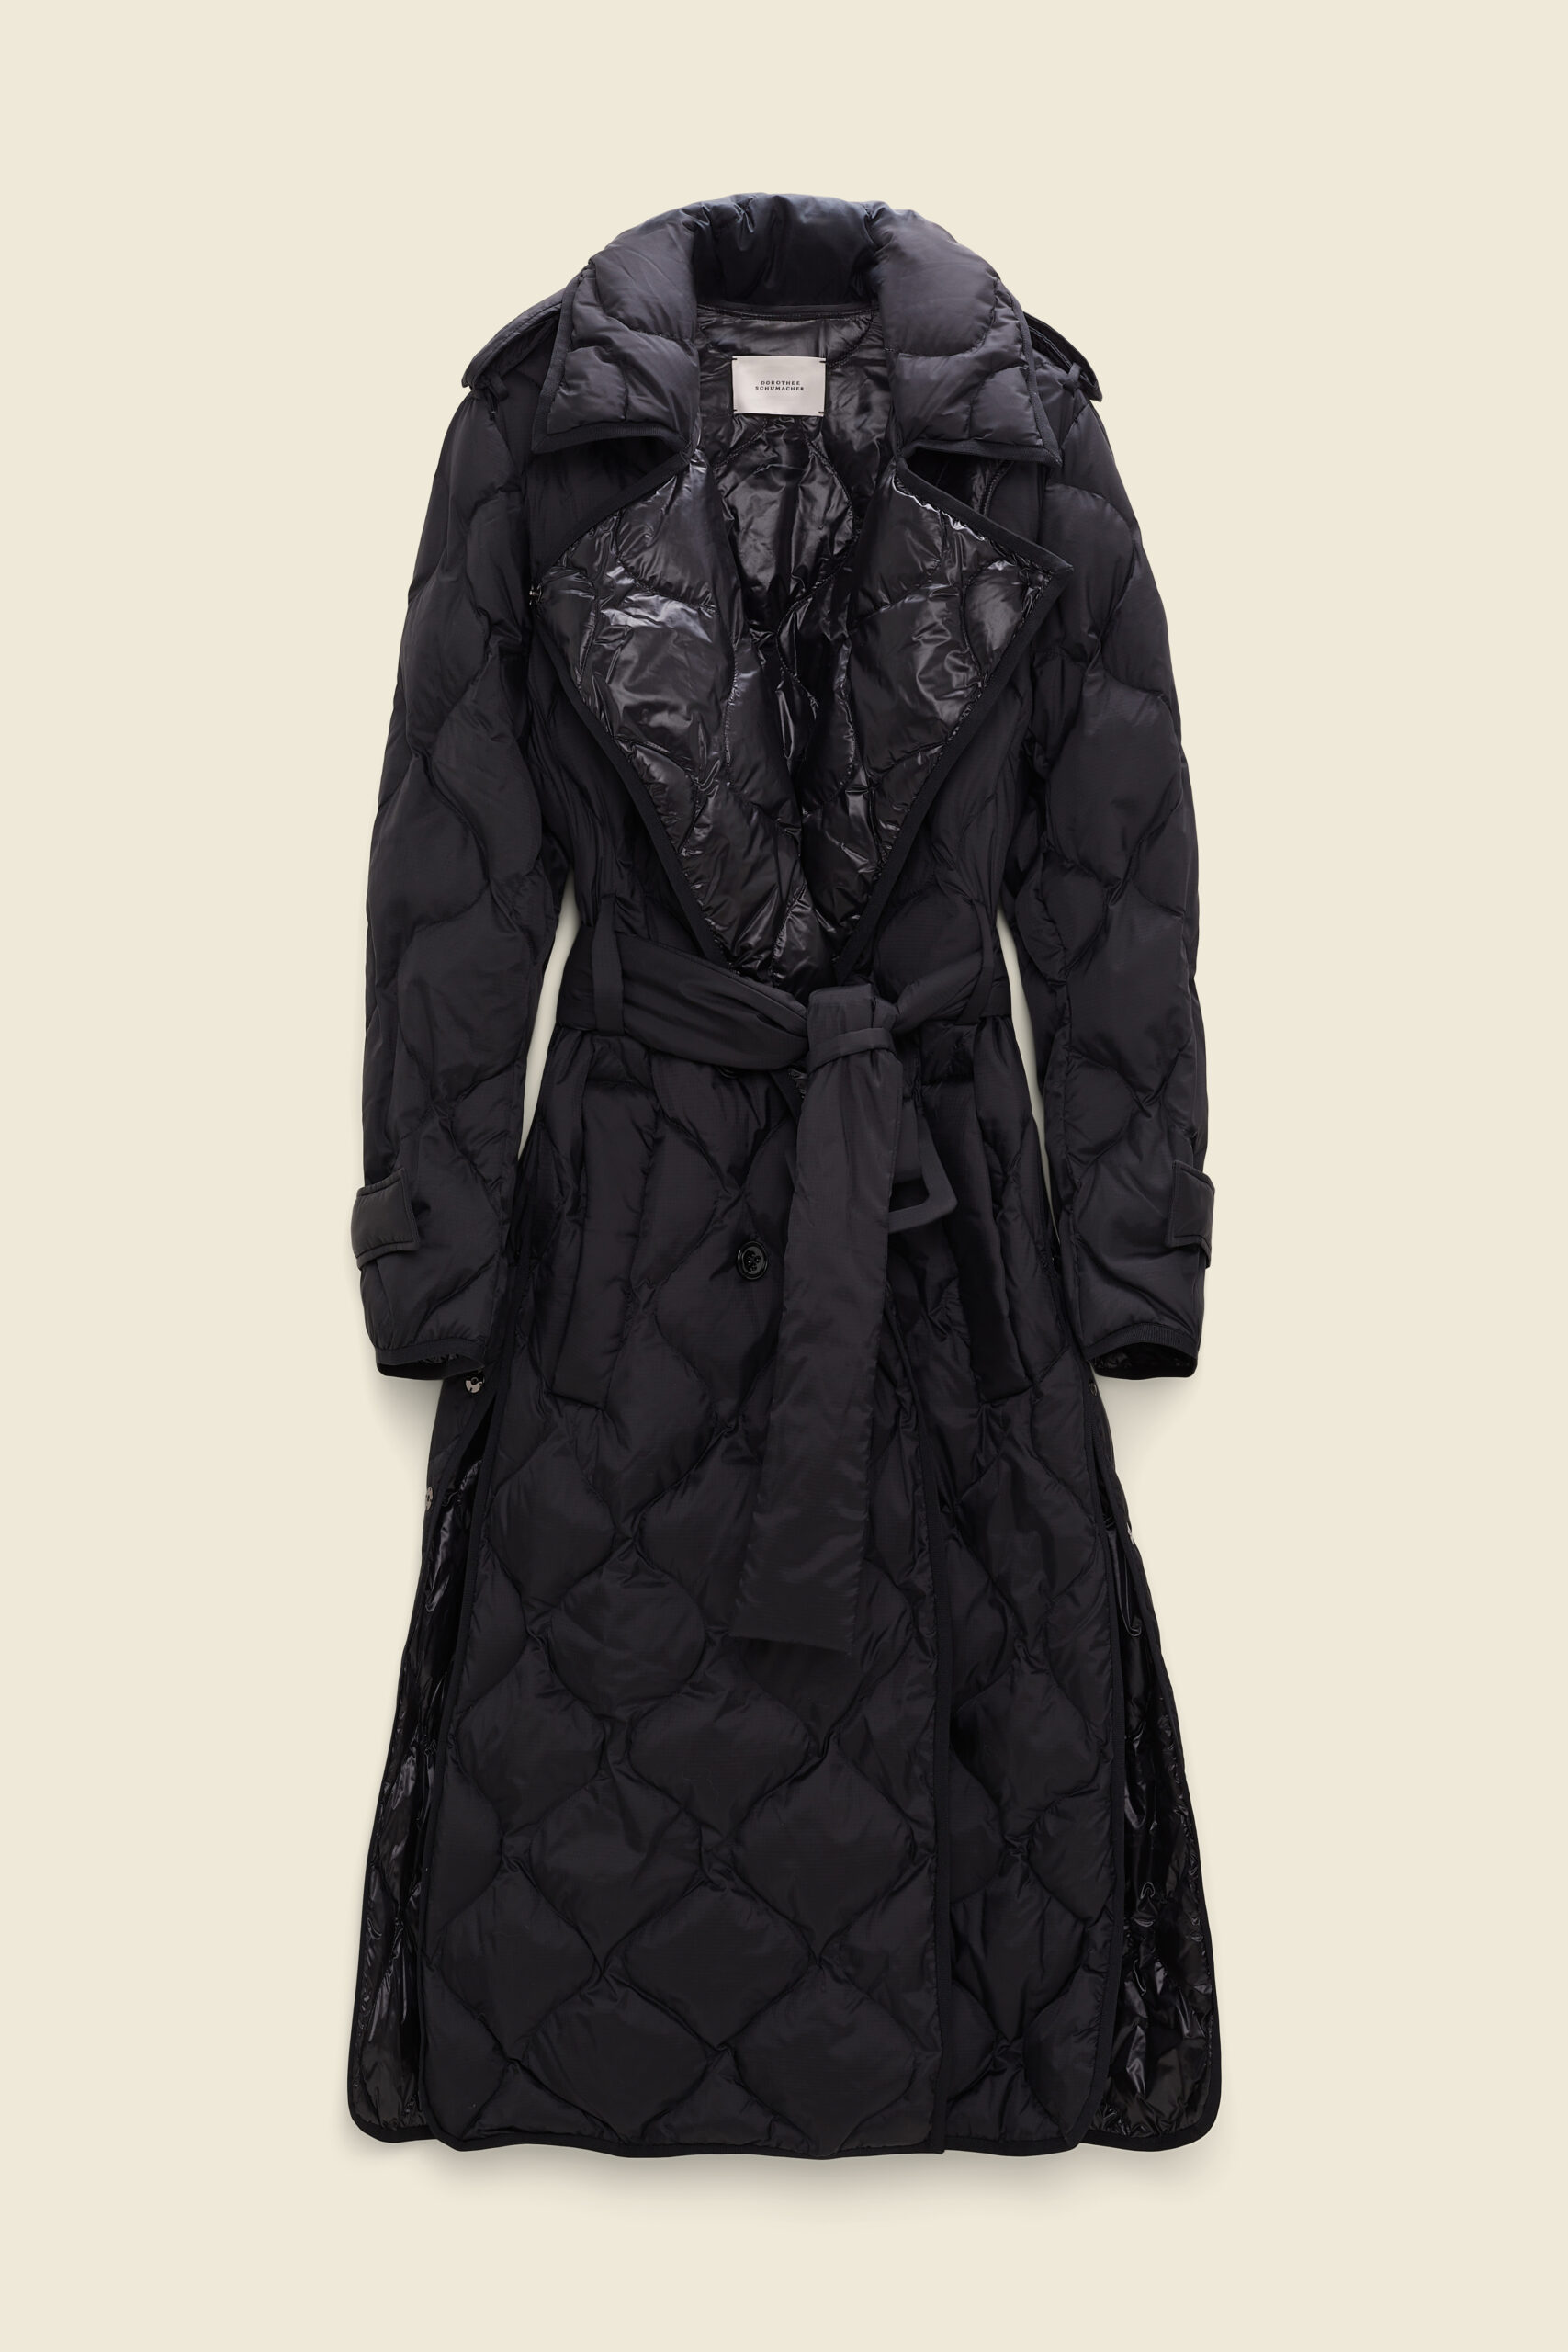 Dorothee Schumacher Cozy Coolness trench